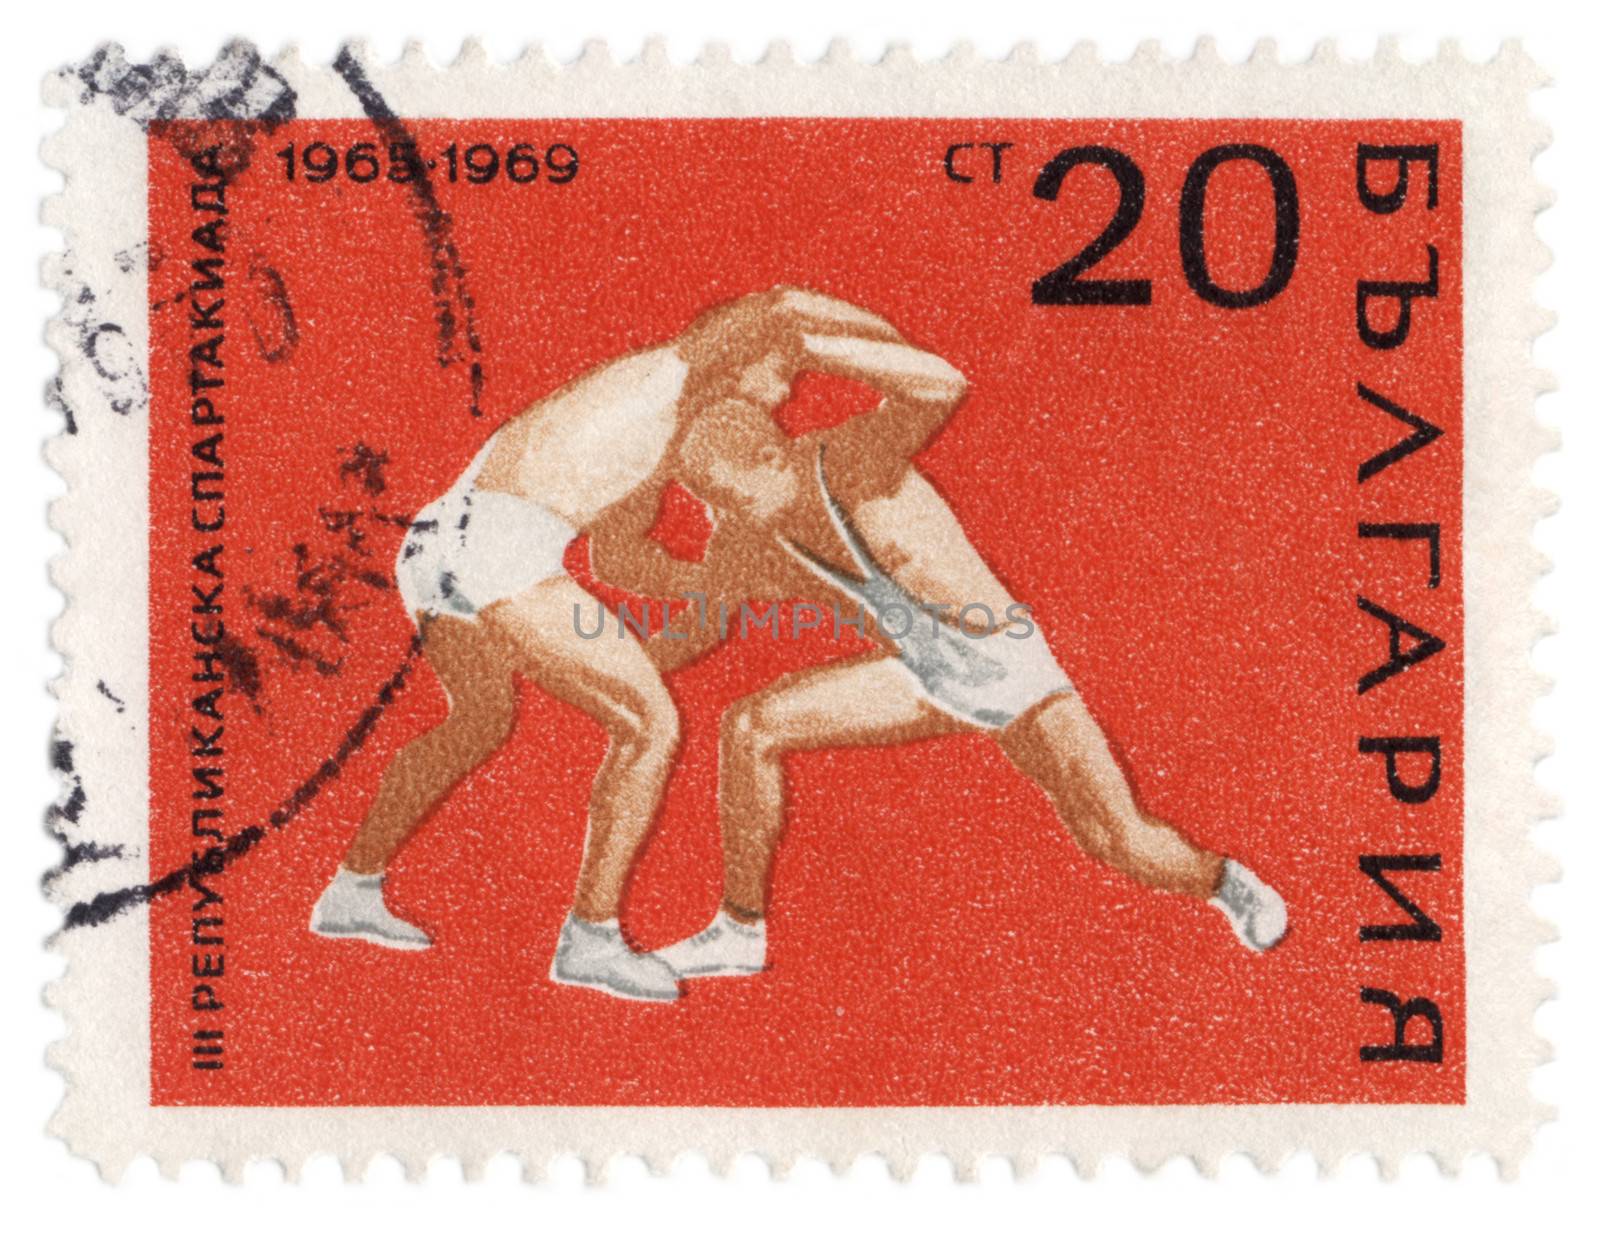 Wrestling on post stamp by wander